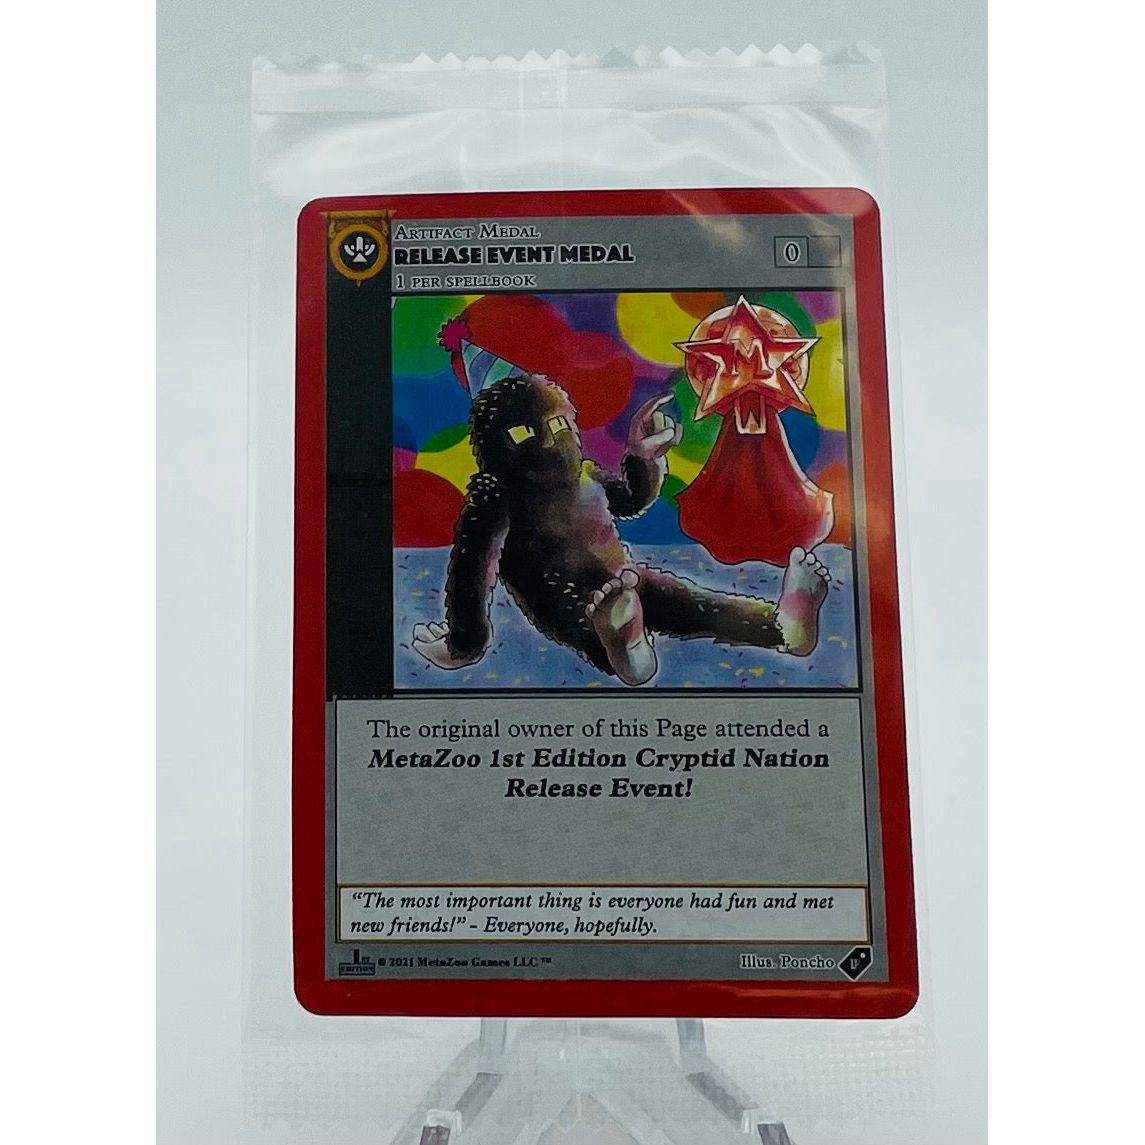 Metazoo Cryptid Nation Release Event - Medal Promo Card - 1st Edition, Sealed